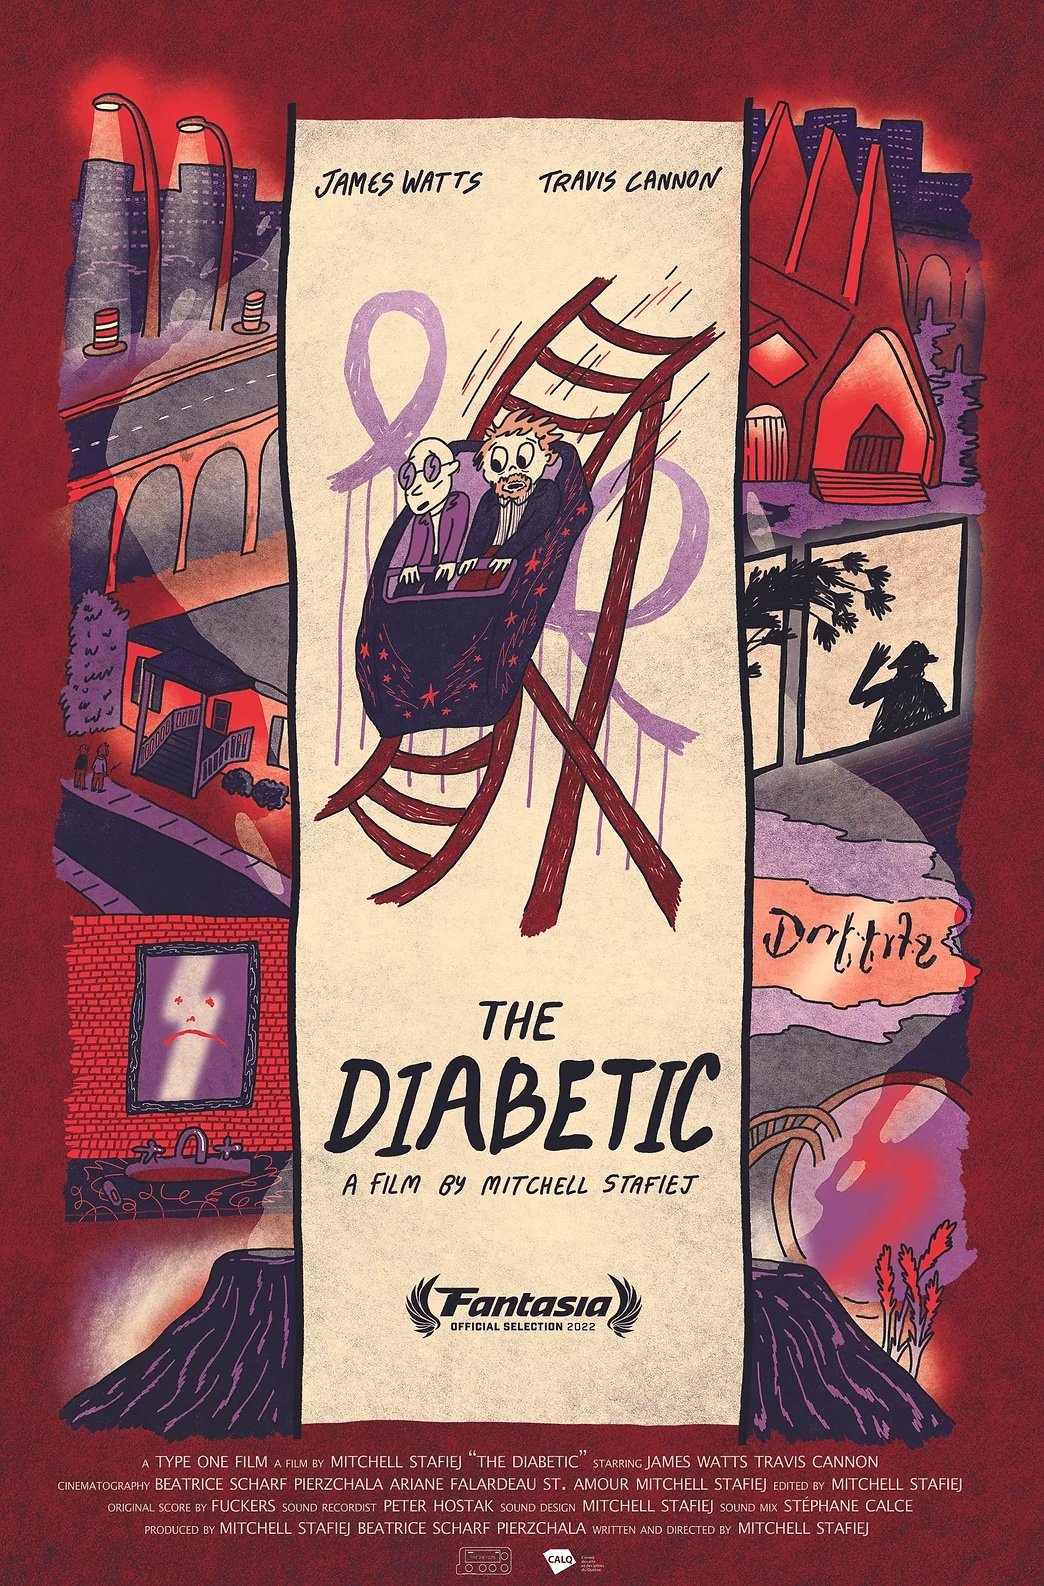  Poster for   The Diabetic  (2022 ), a film by Mitchell Stafeij 